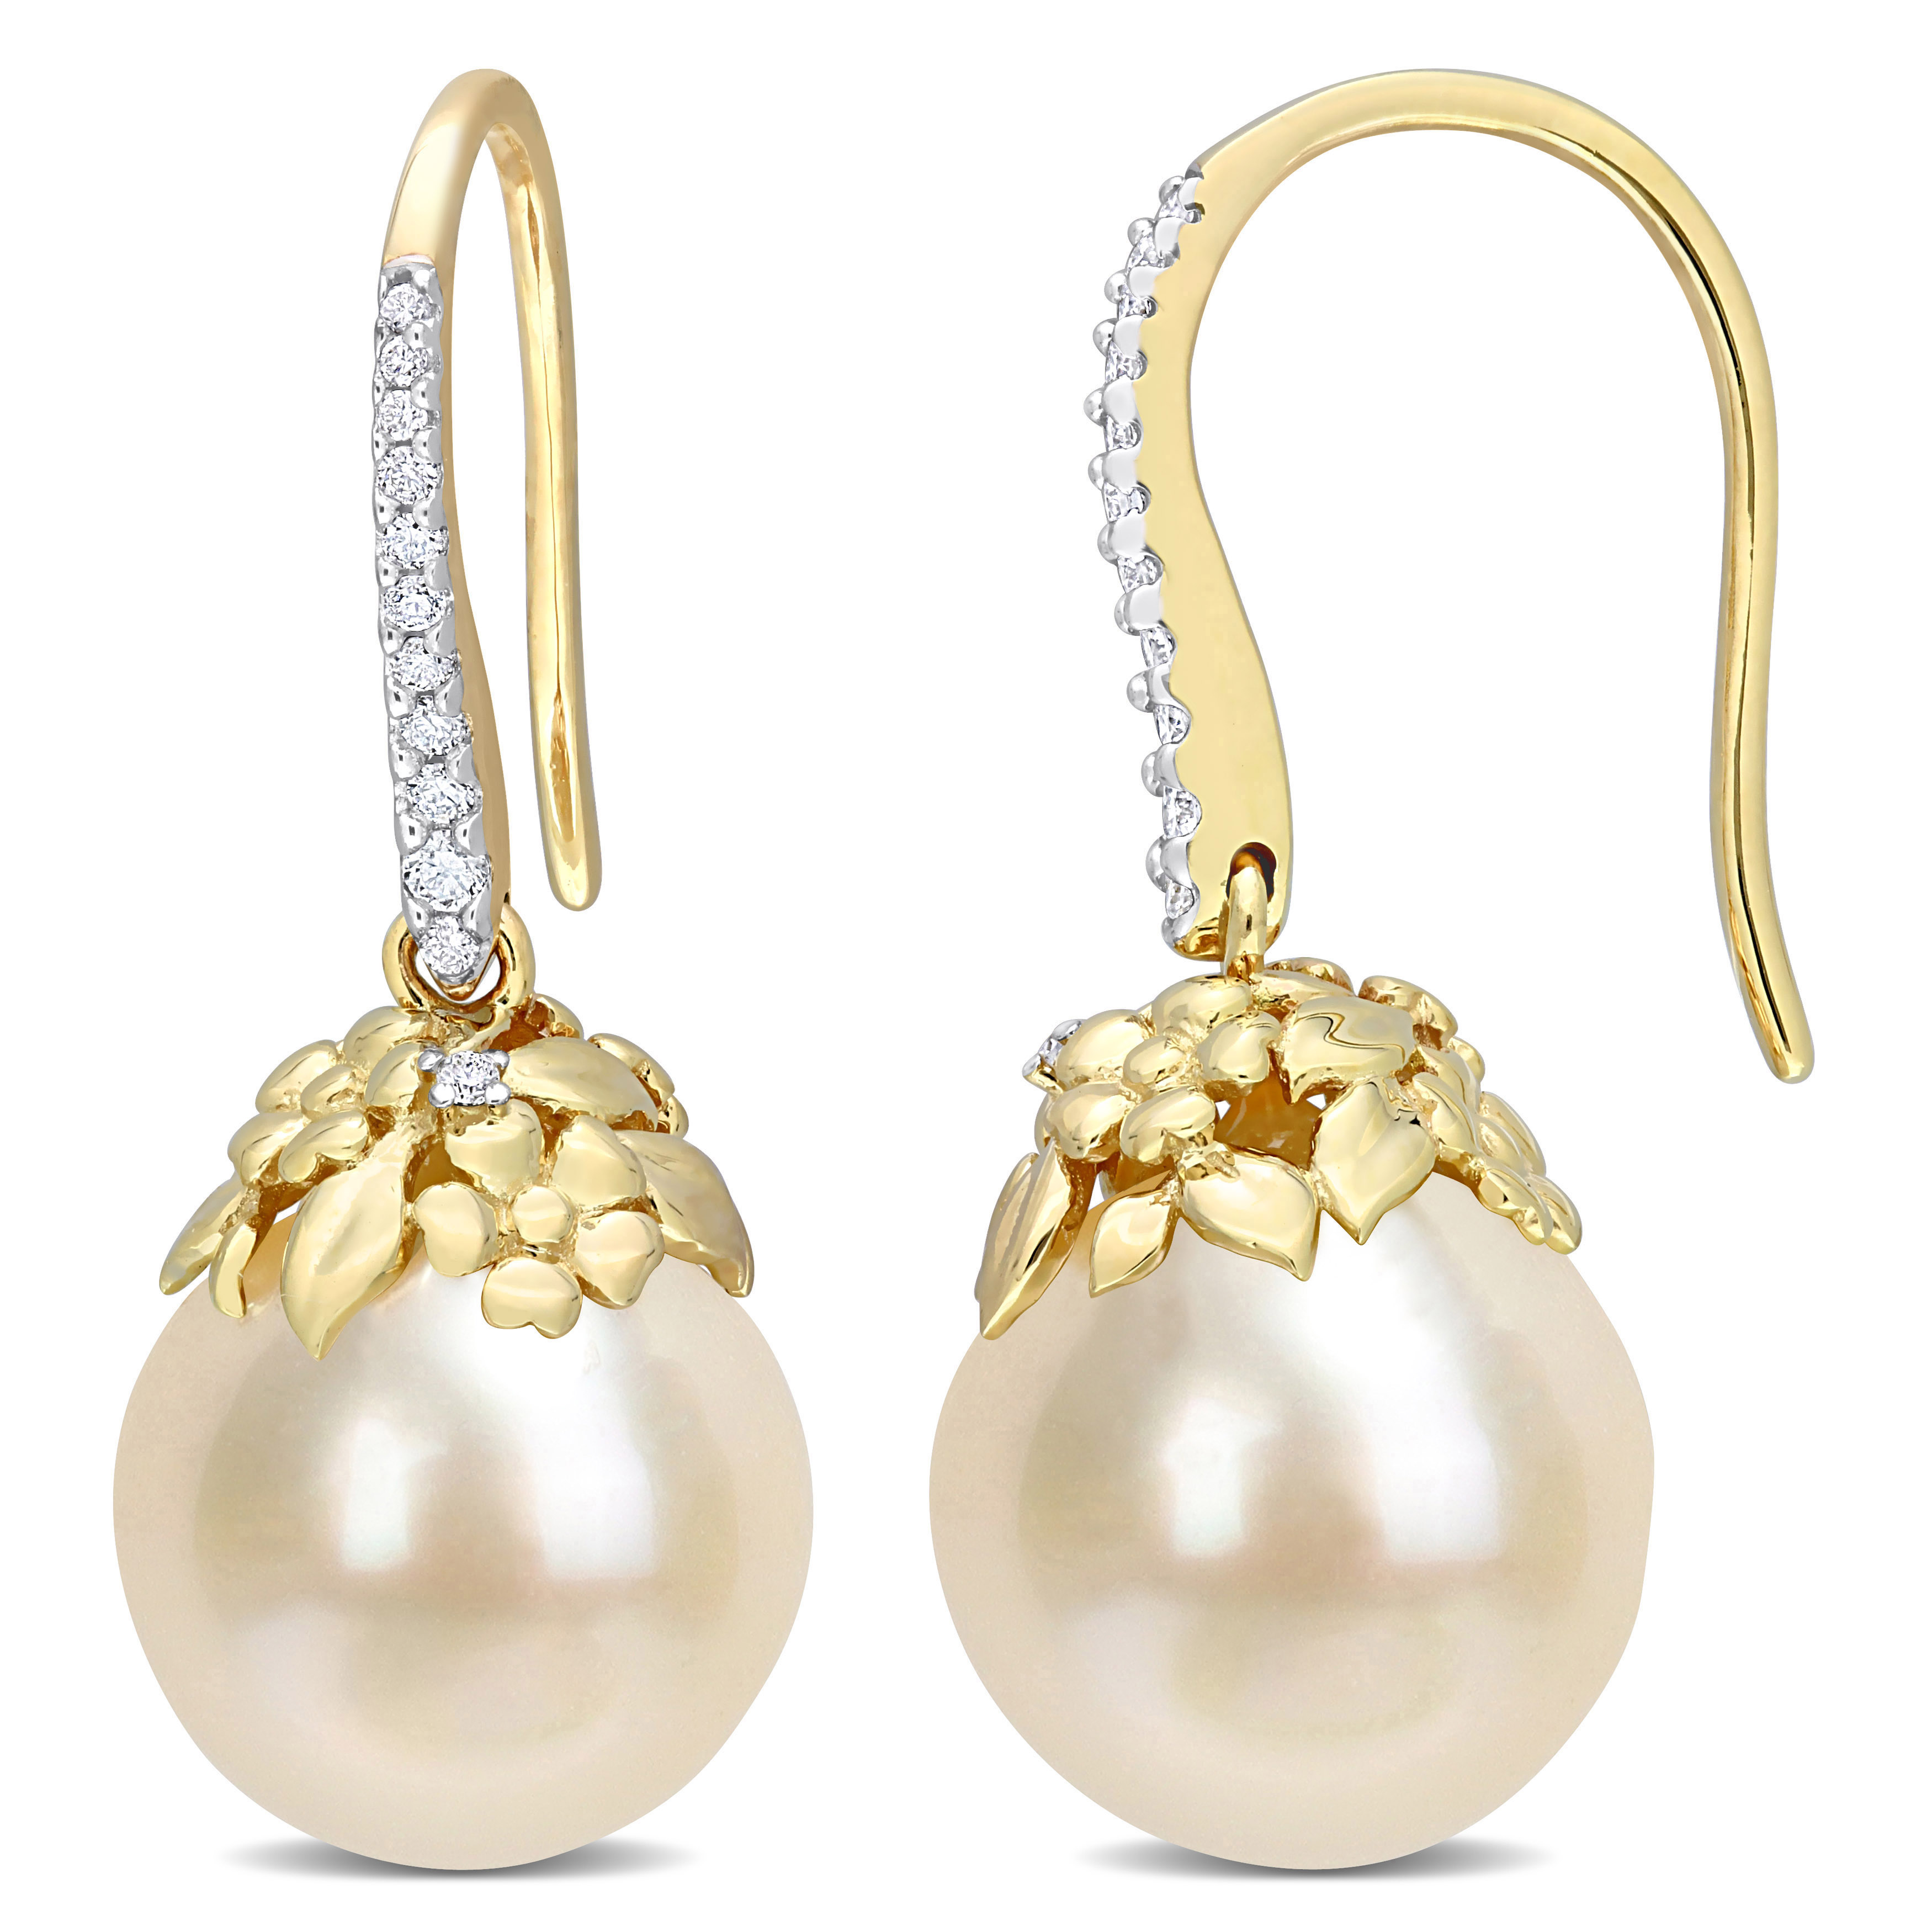 9-10 MM South Sea Cultured Pearl and 1/7 CT TW Diamond Shepherd Hook Earrings in 14k Yellow Gold